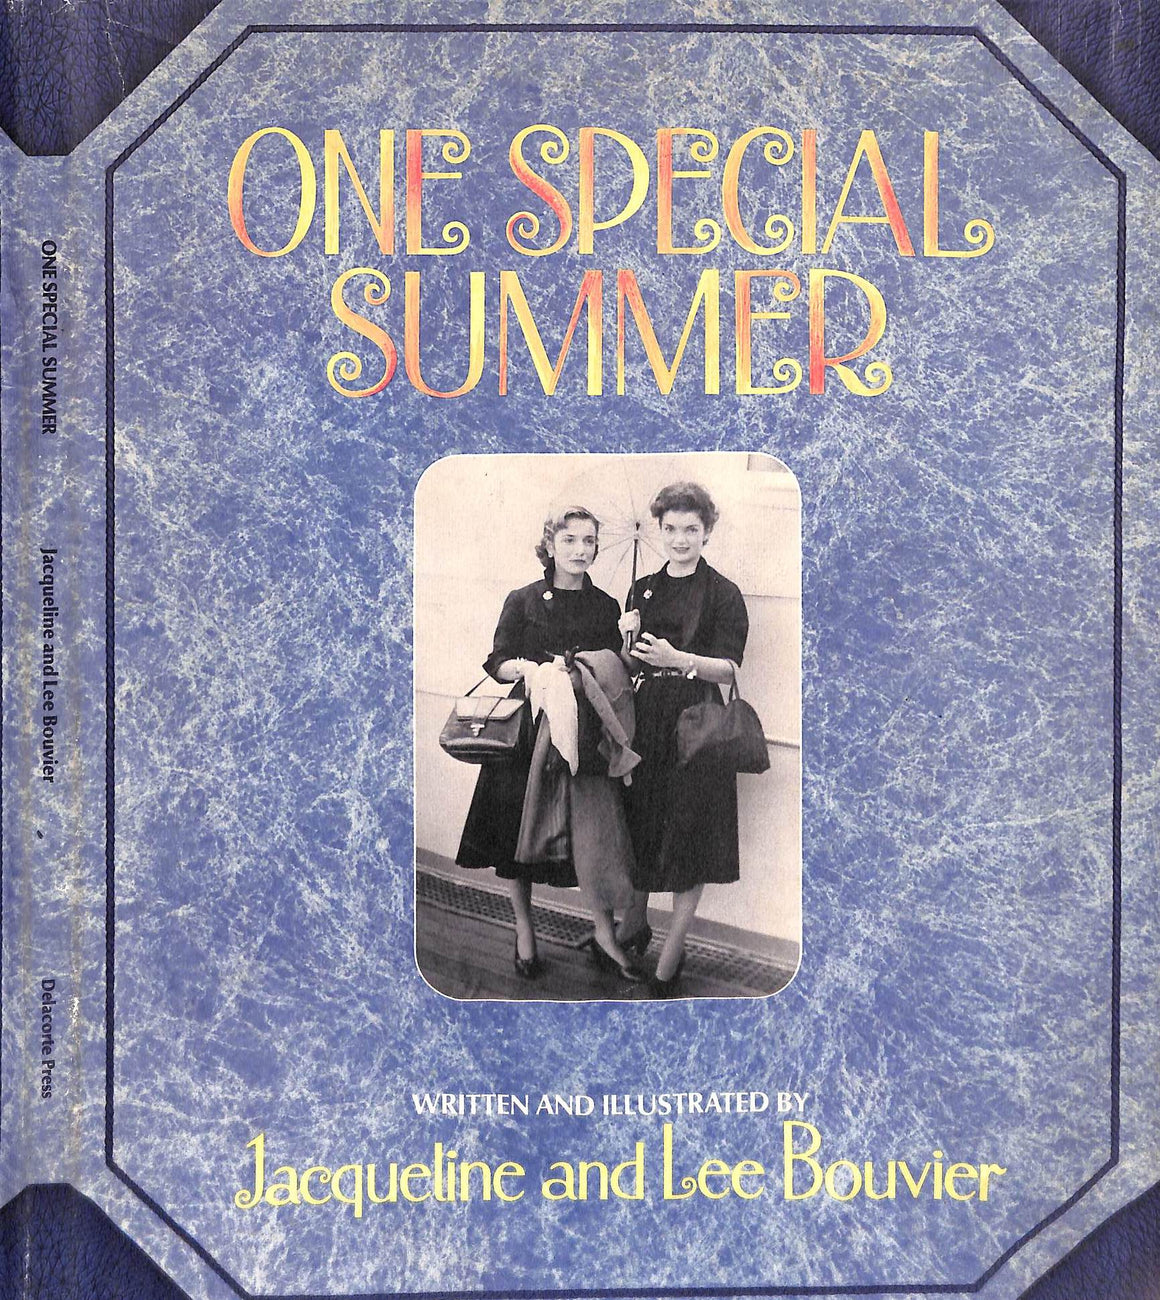 "One Special Summer" 1974 BOUVIER, Jacqueline and Lee [written and illustrated by]